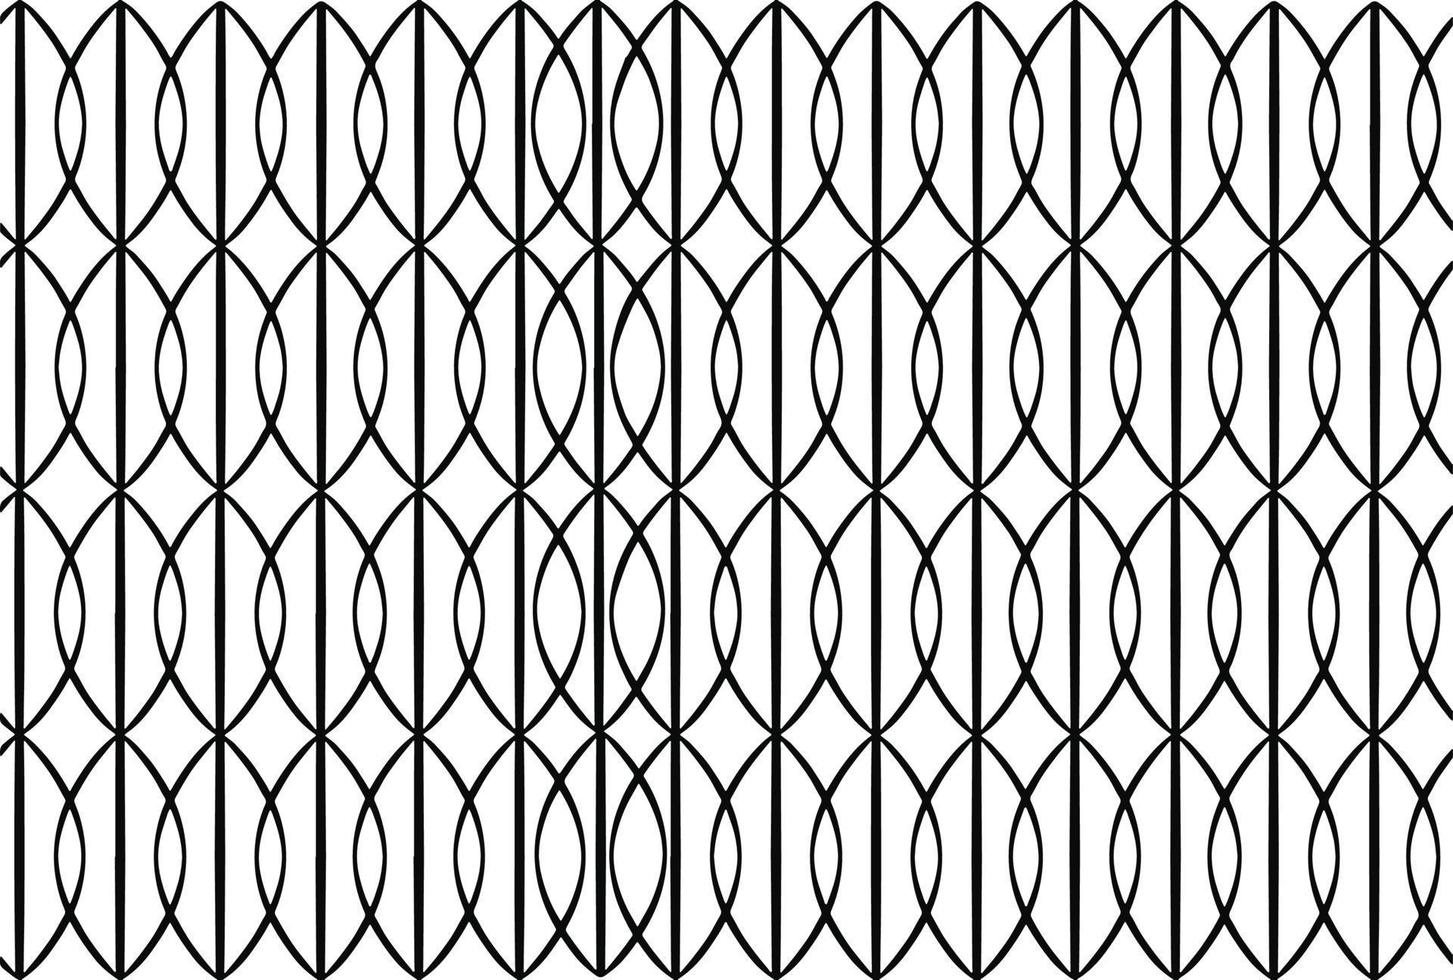 Black and white rhythmic seamless pattern ornament textile vector